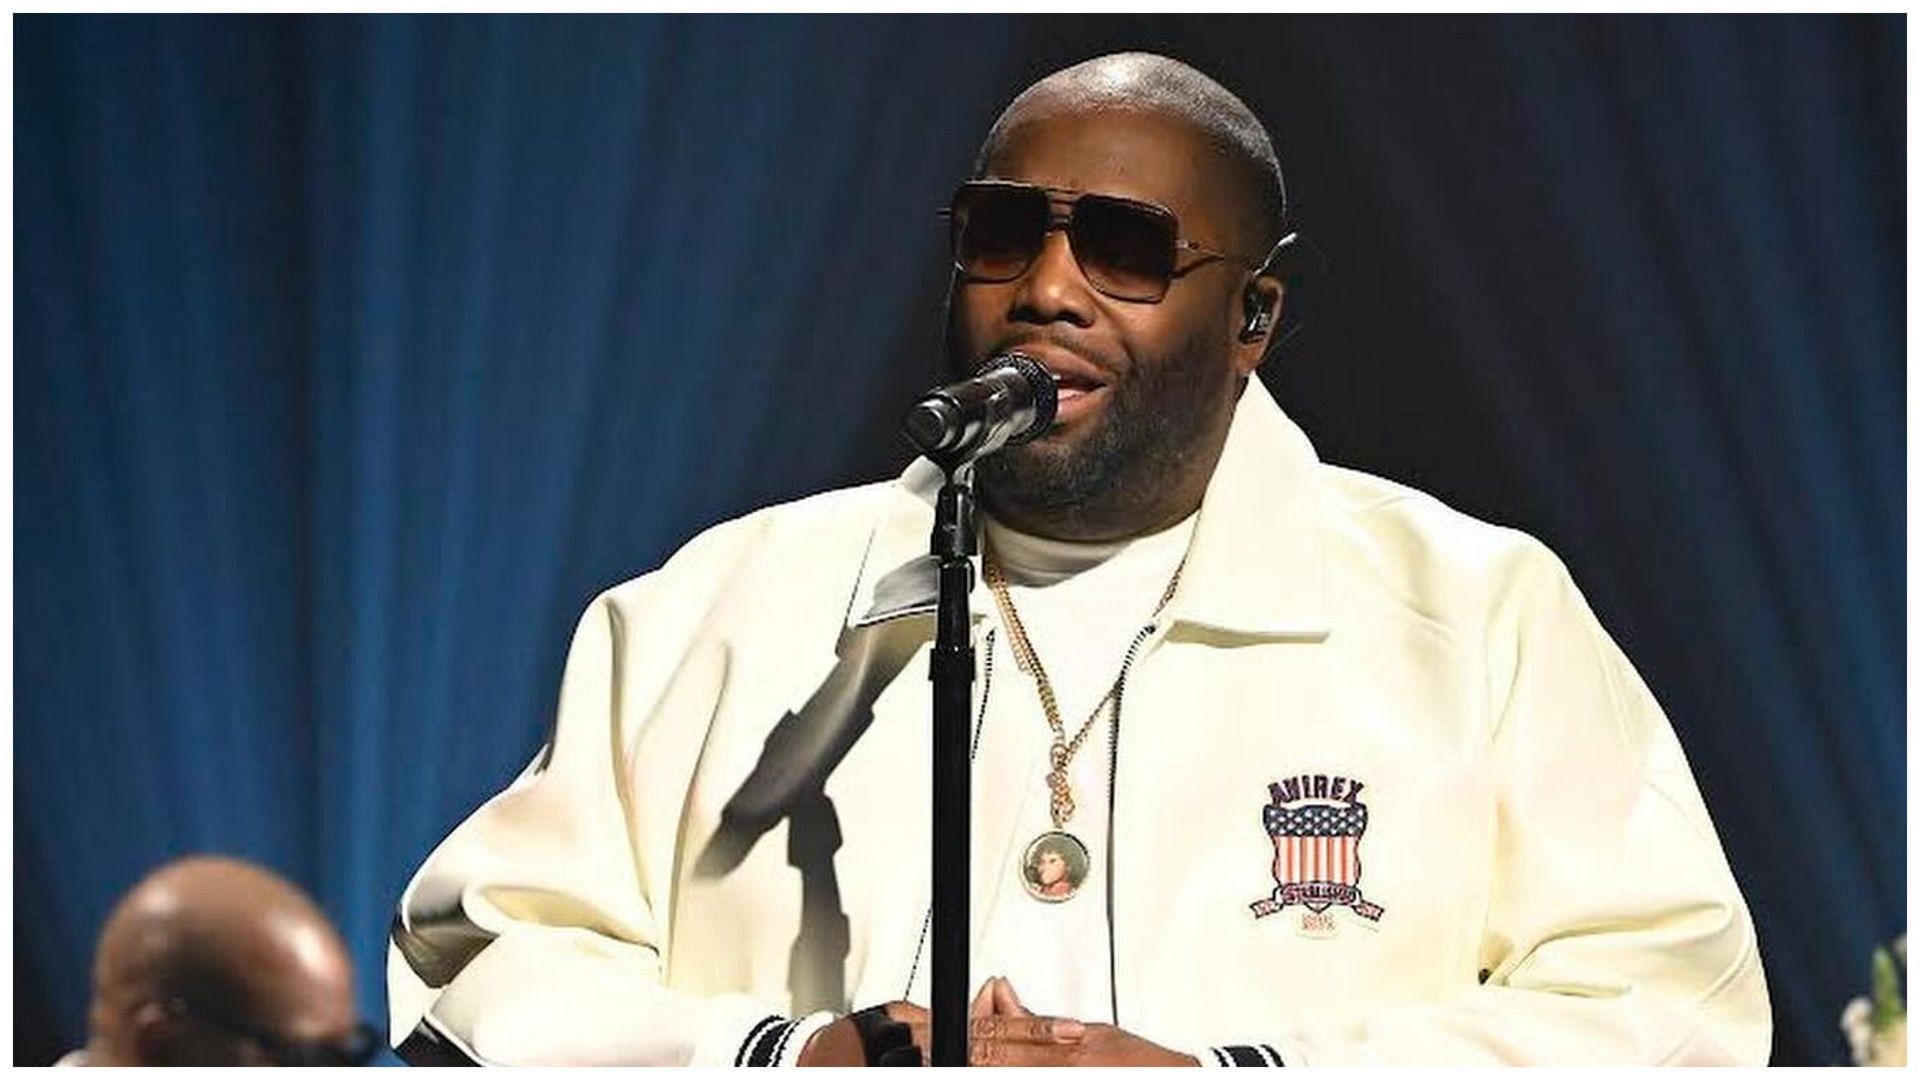 Killer Mike opens up about his detainment during the Grammy Awards (Image via Instagram/@killermike)